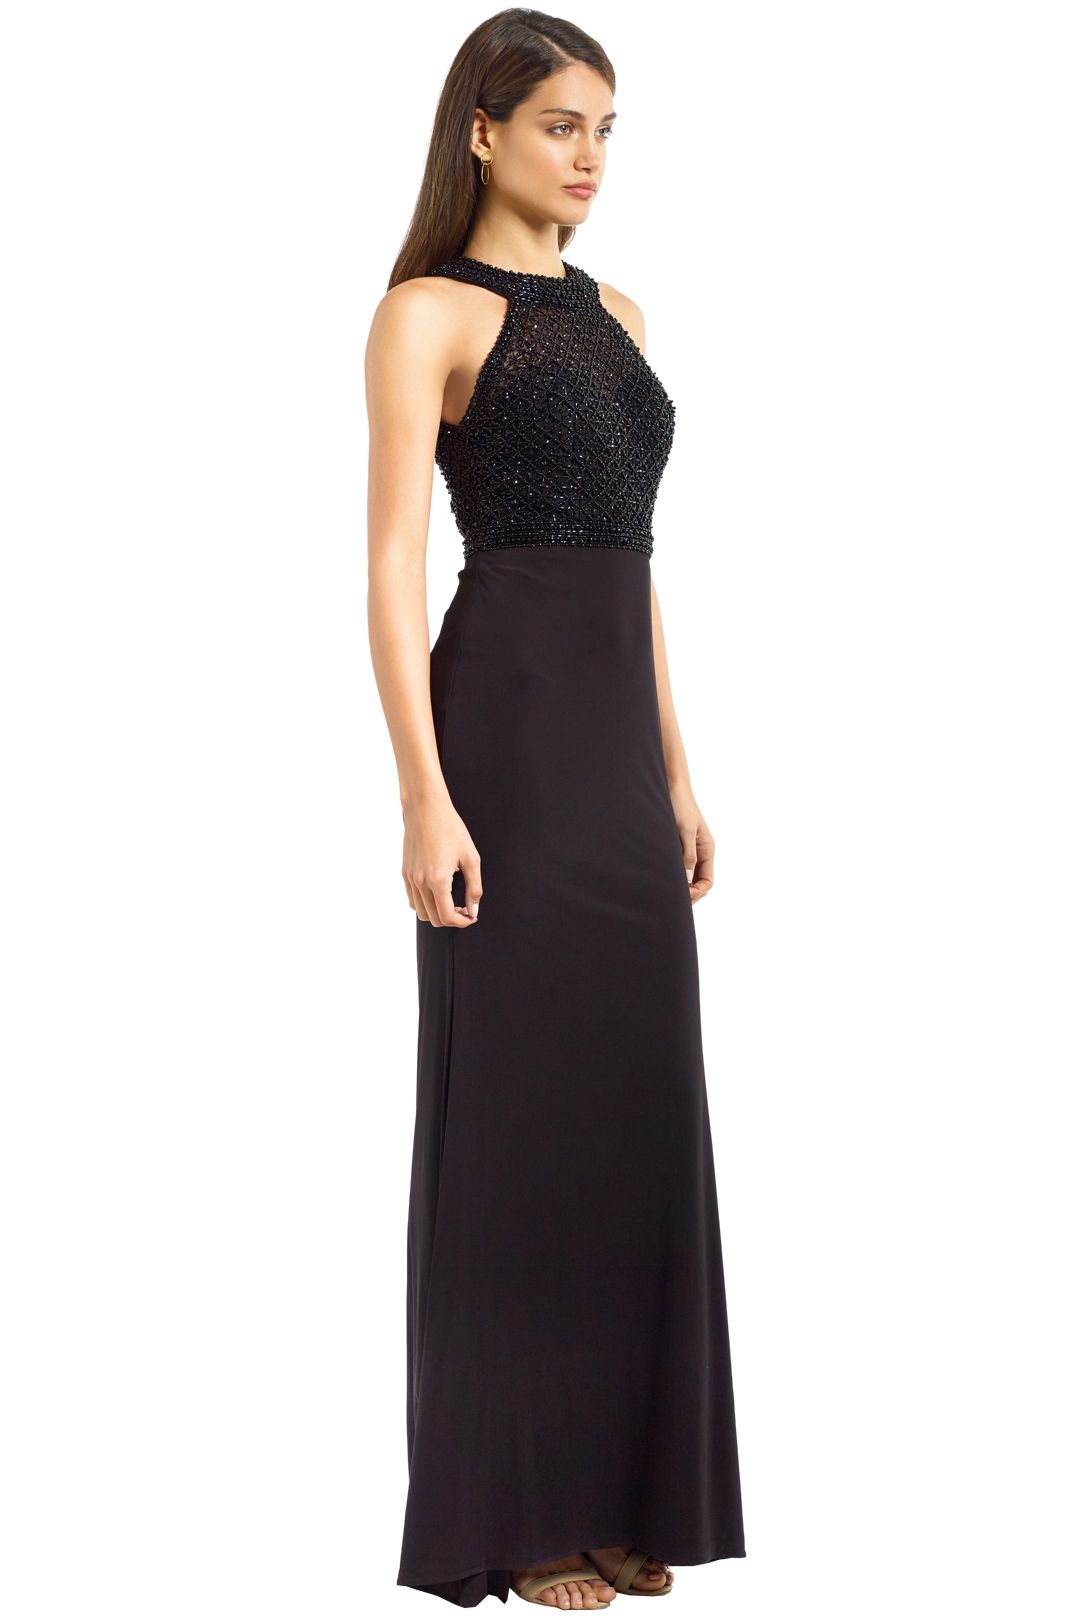 Tyra Gown in Black by Tania Olsen for Hire | GlamCorner